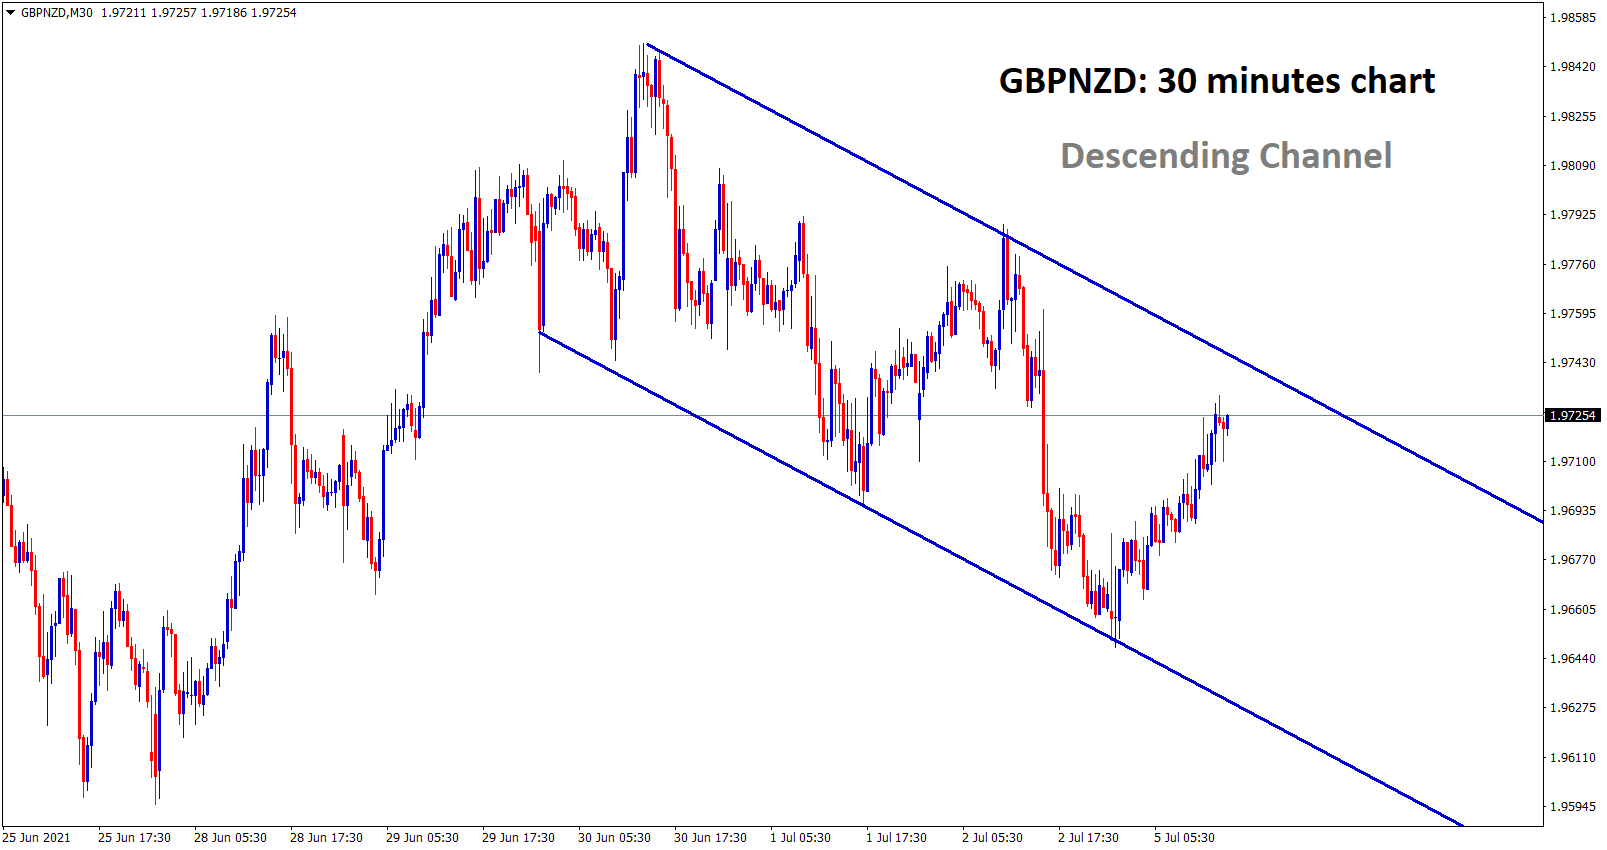 descending channel found in gbpnzd 30 minutes timeframe